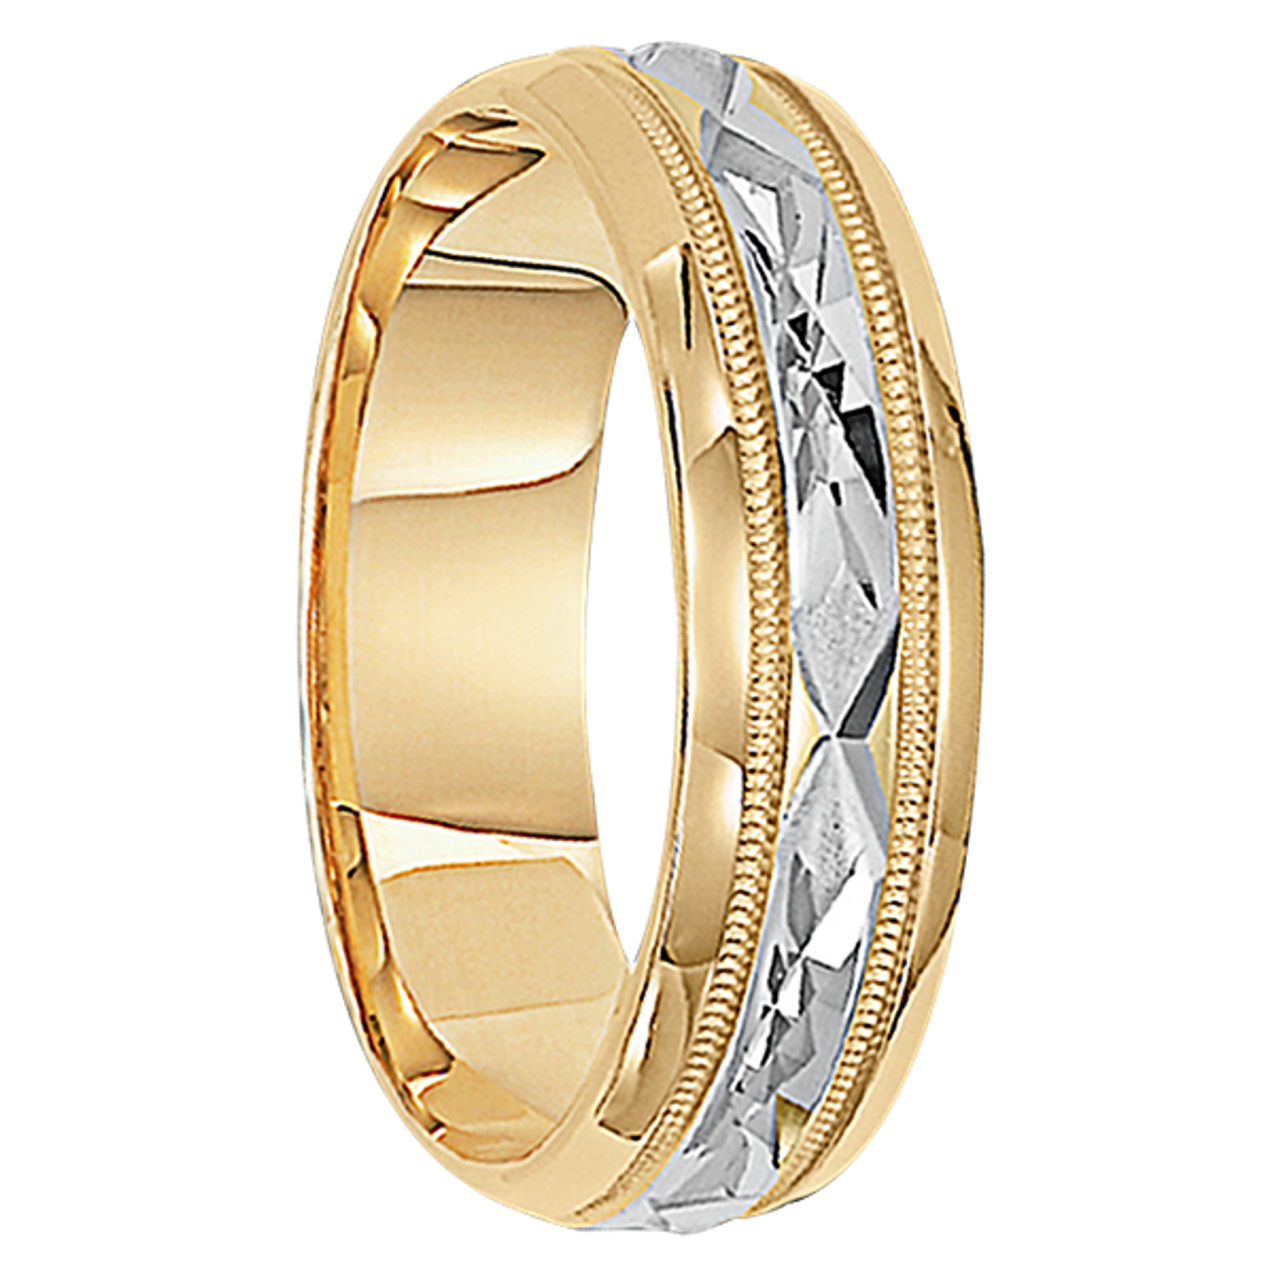 6mm Unique Mens Wedding Bands in 10kt. Two-tone Gold - Dublin-10